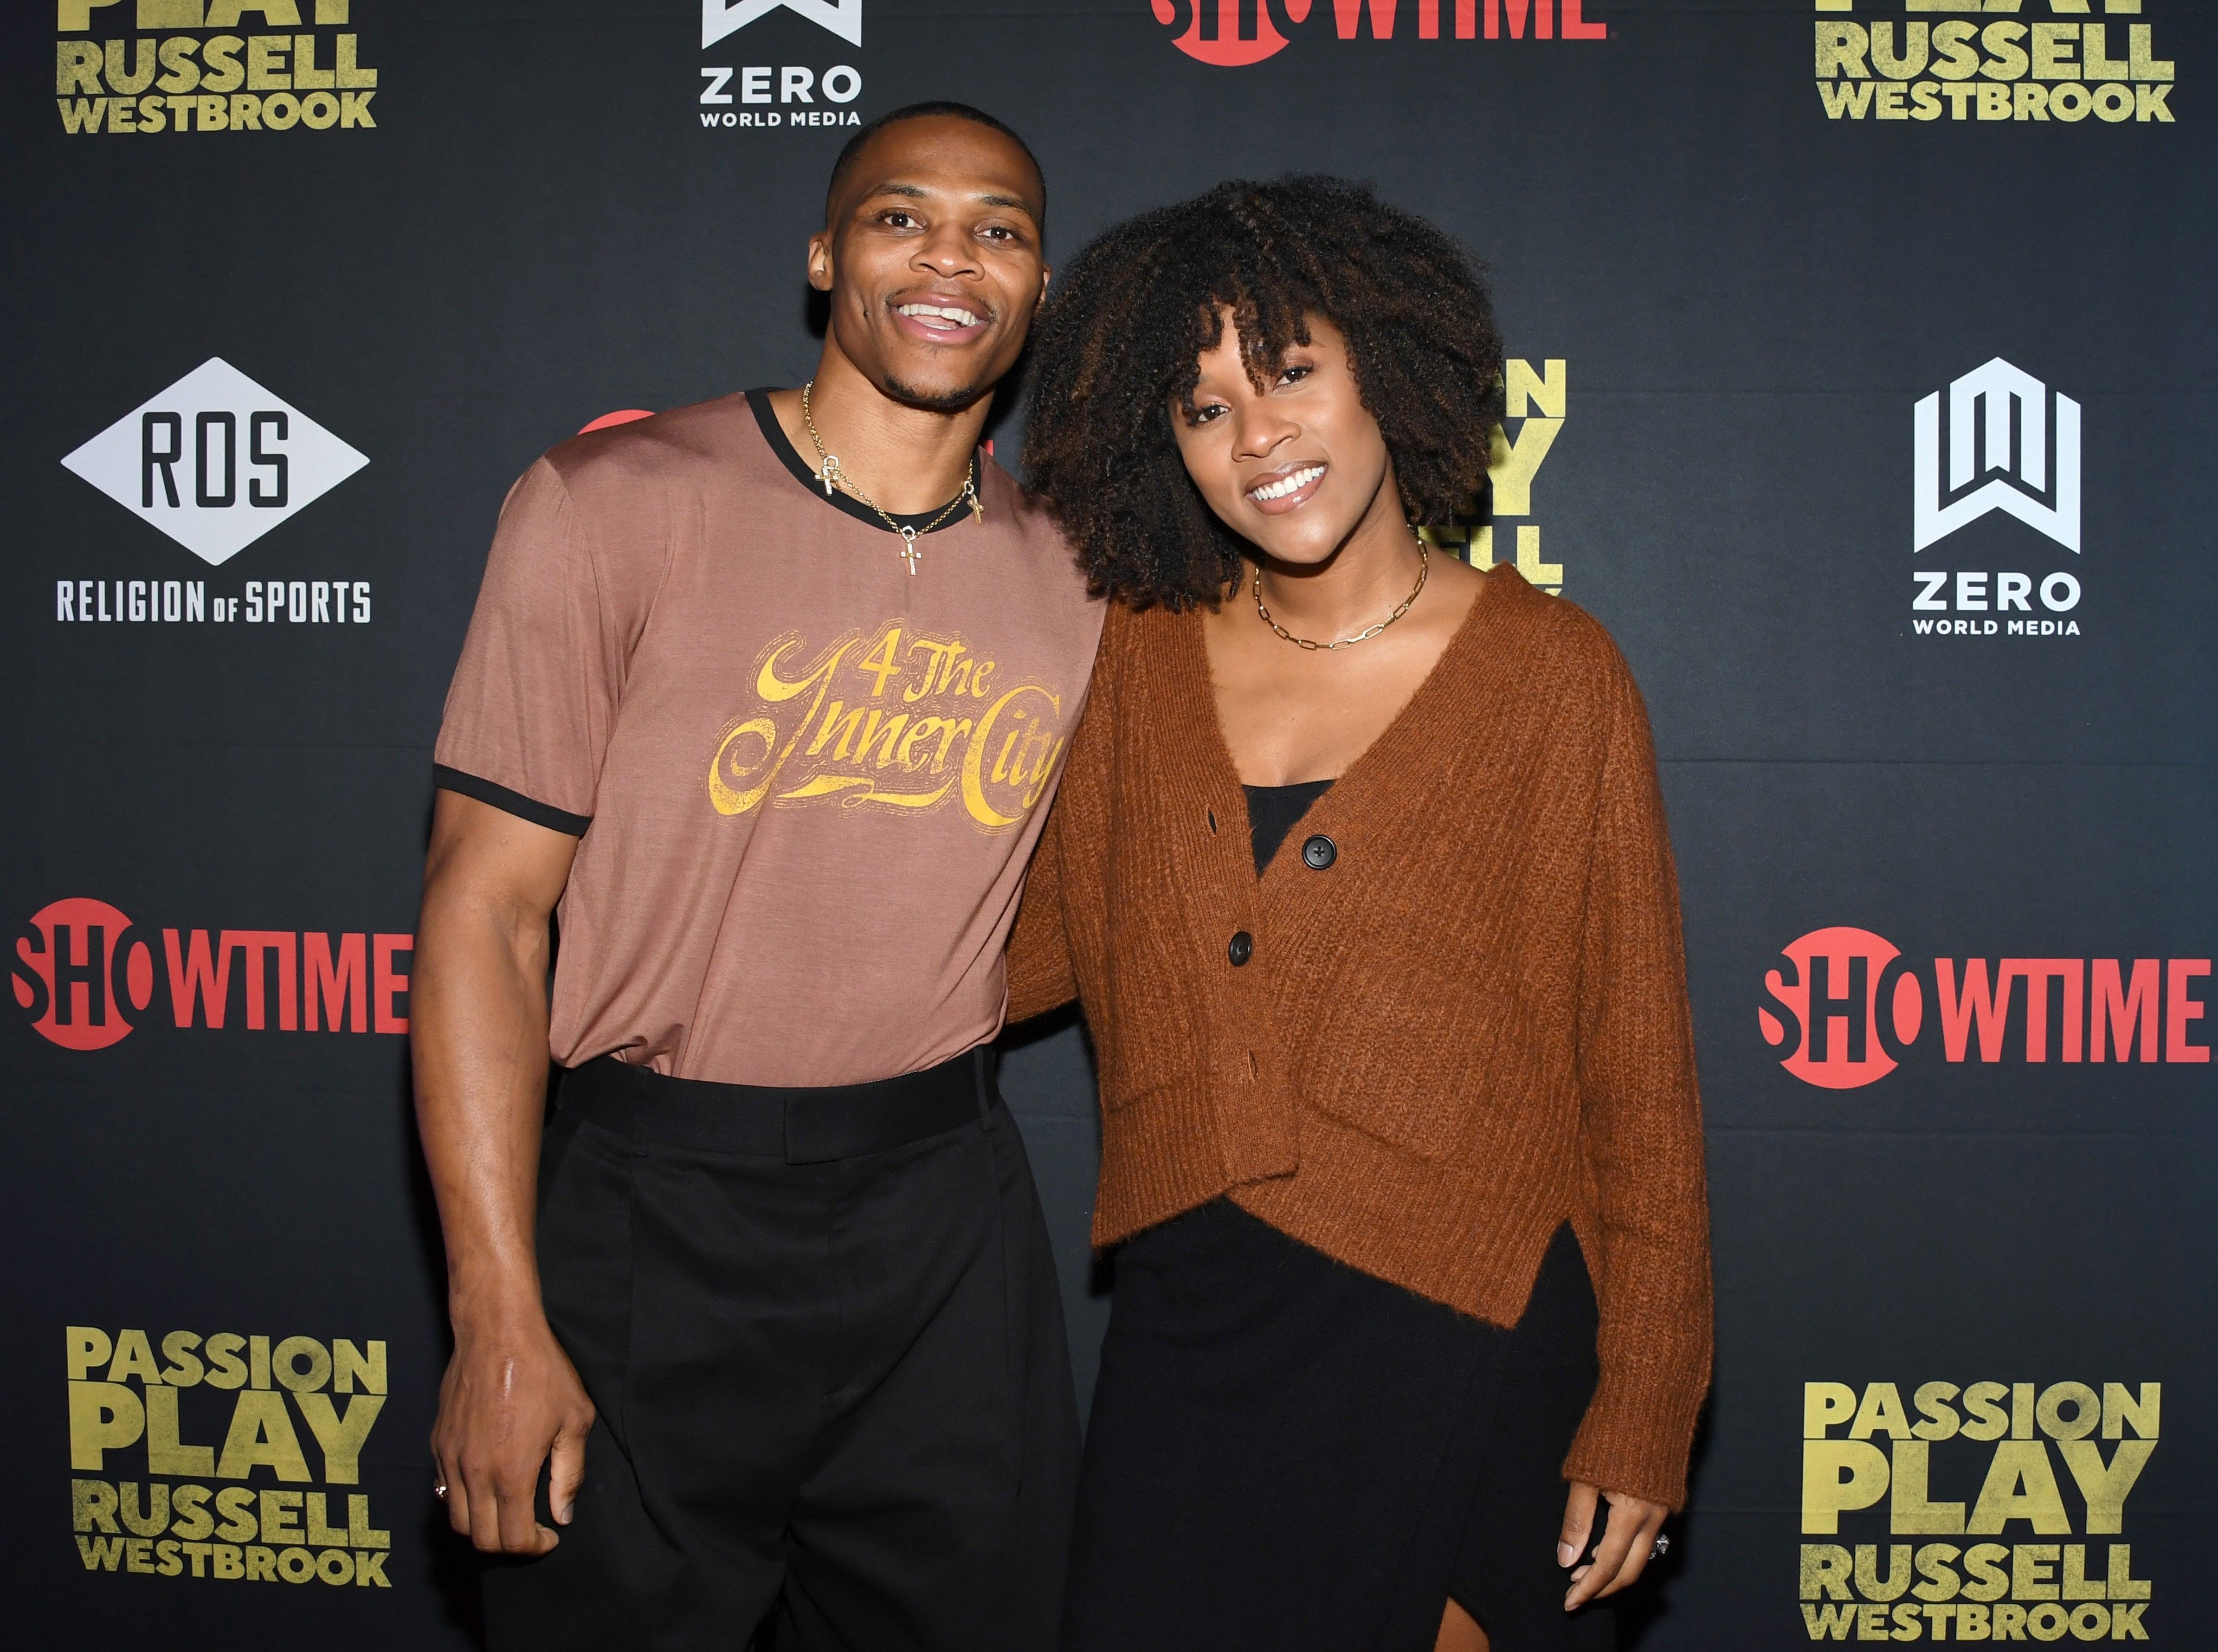 Russell And Nina Westbrook Dish On The Key Ways To Avoid Resentment In Relationships